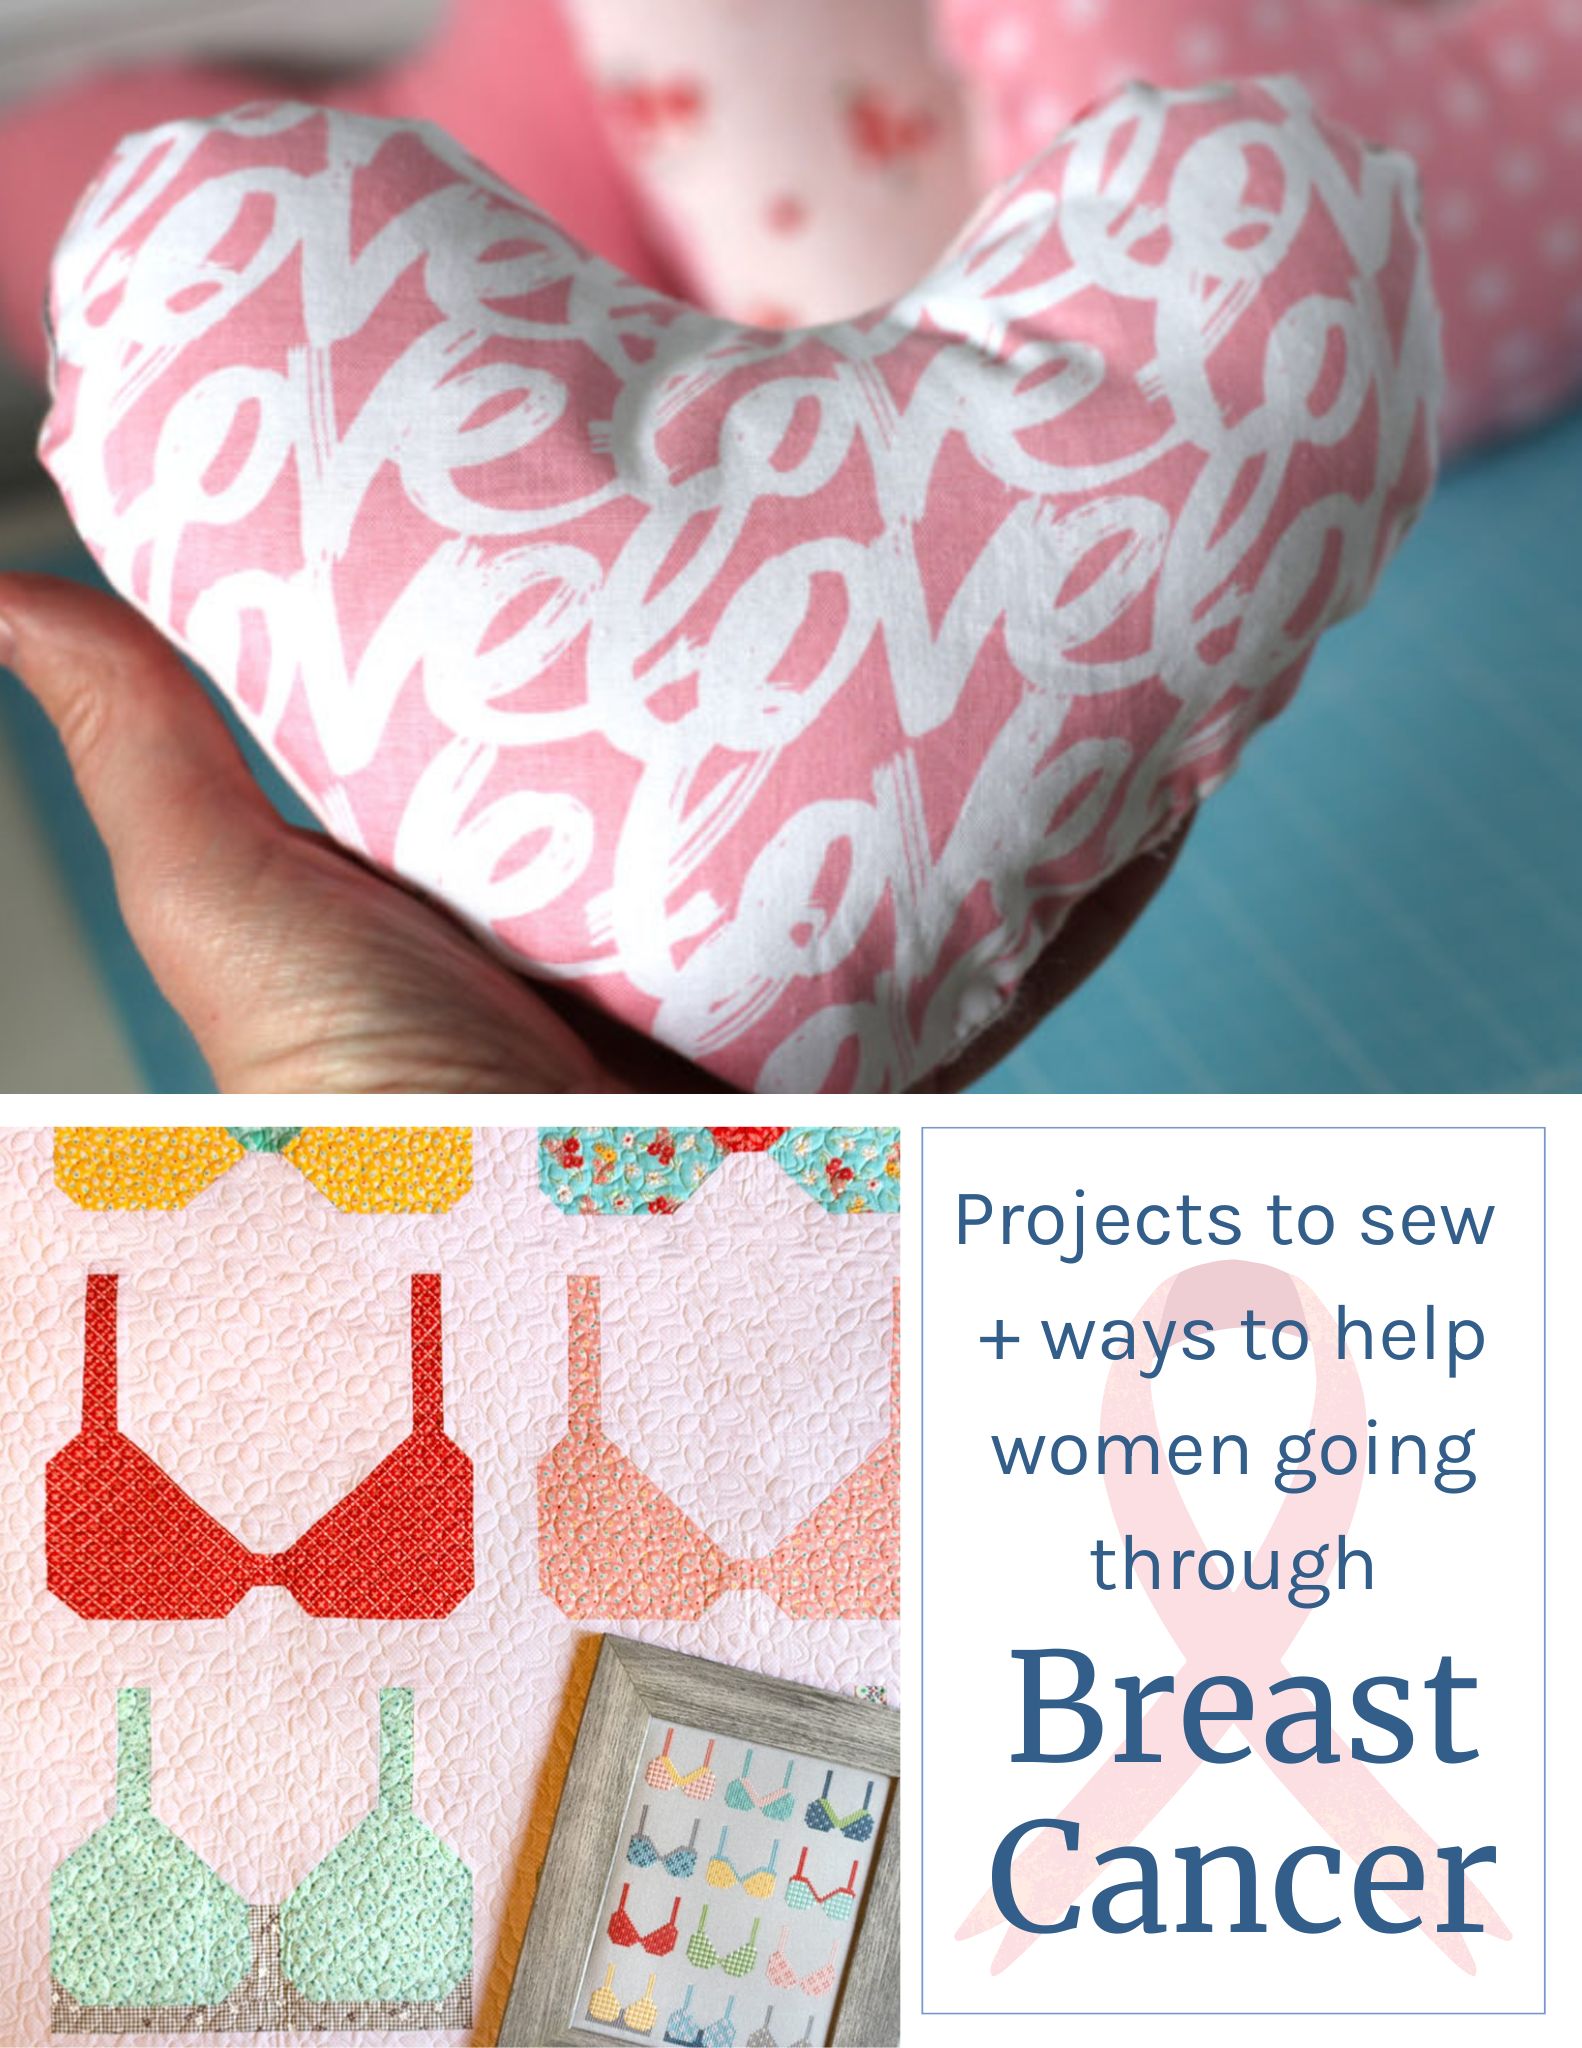 Sew Goodness - Breast Cancer Awareness + Sewing Service